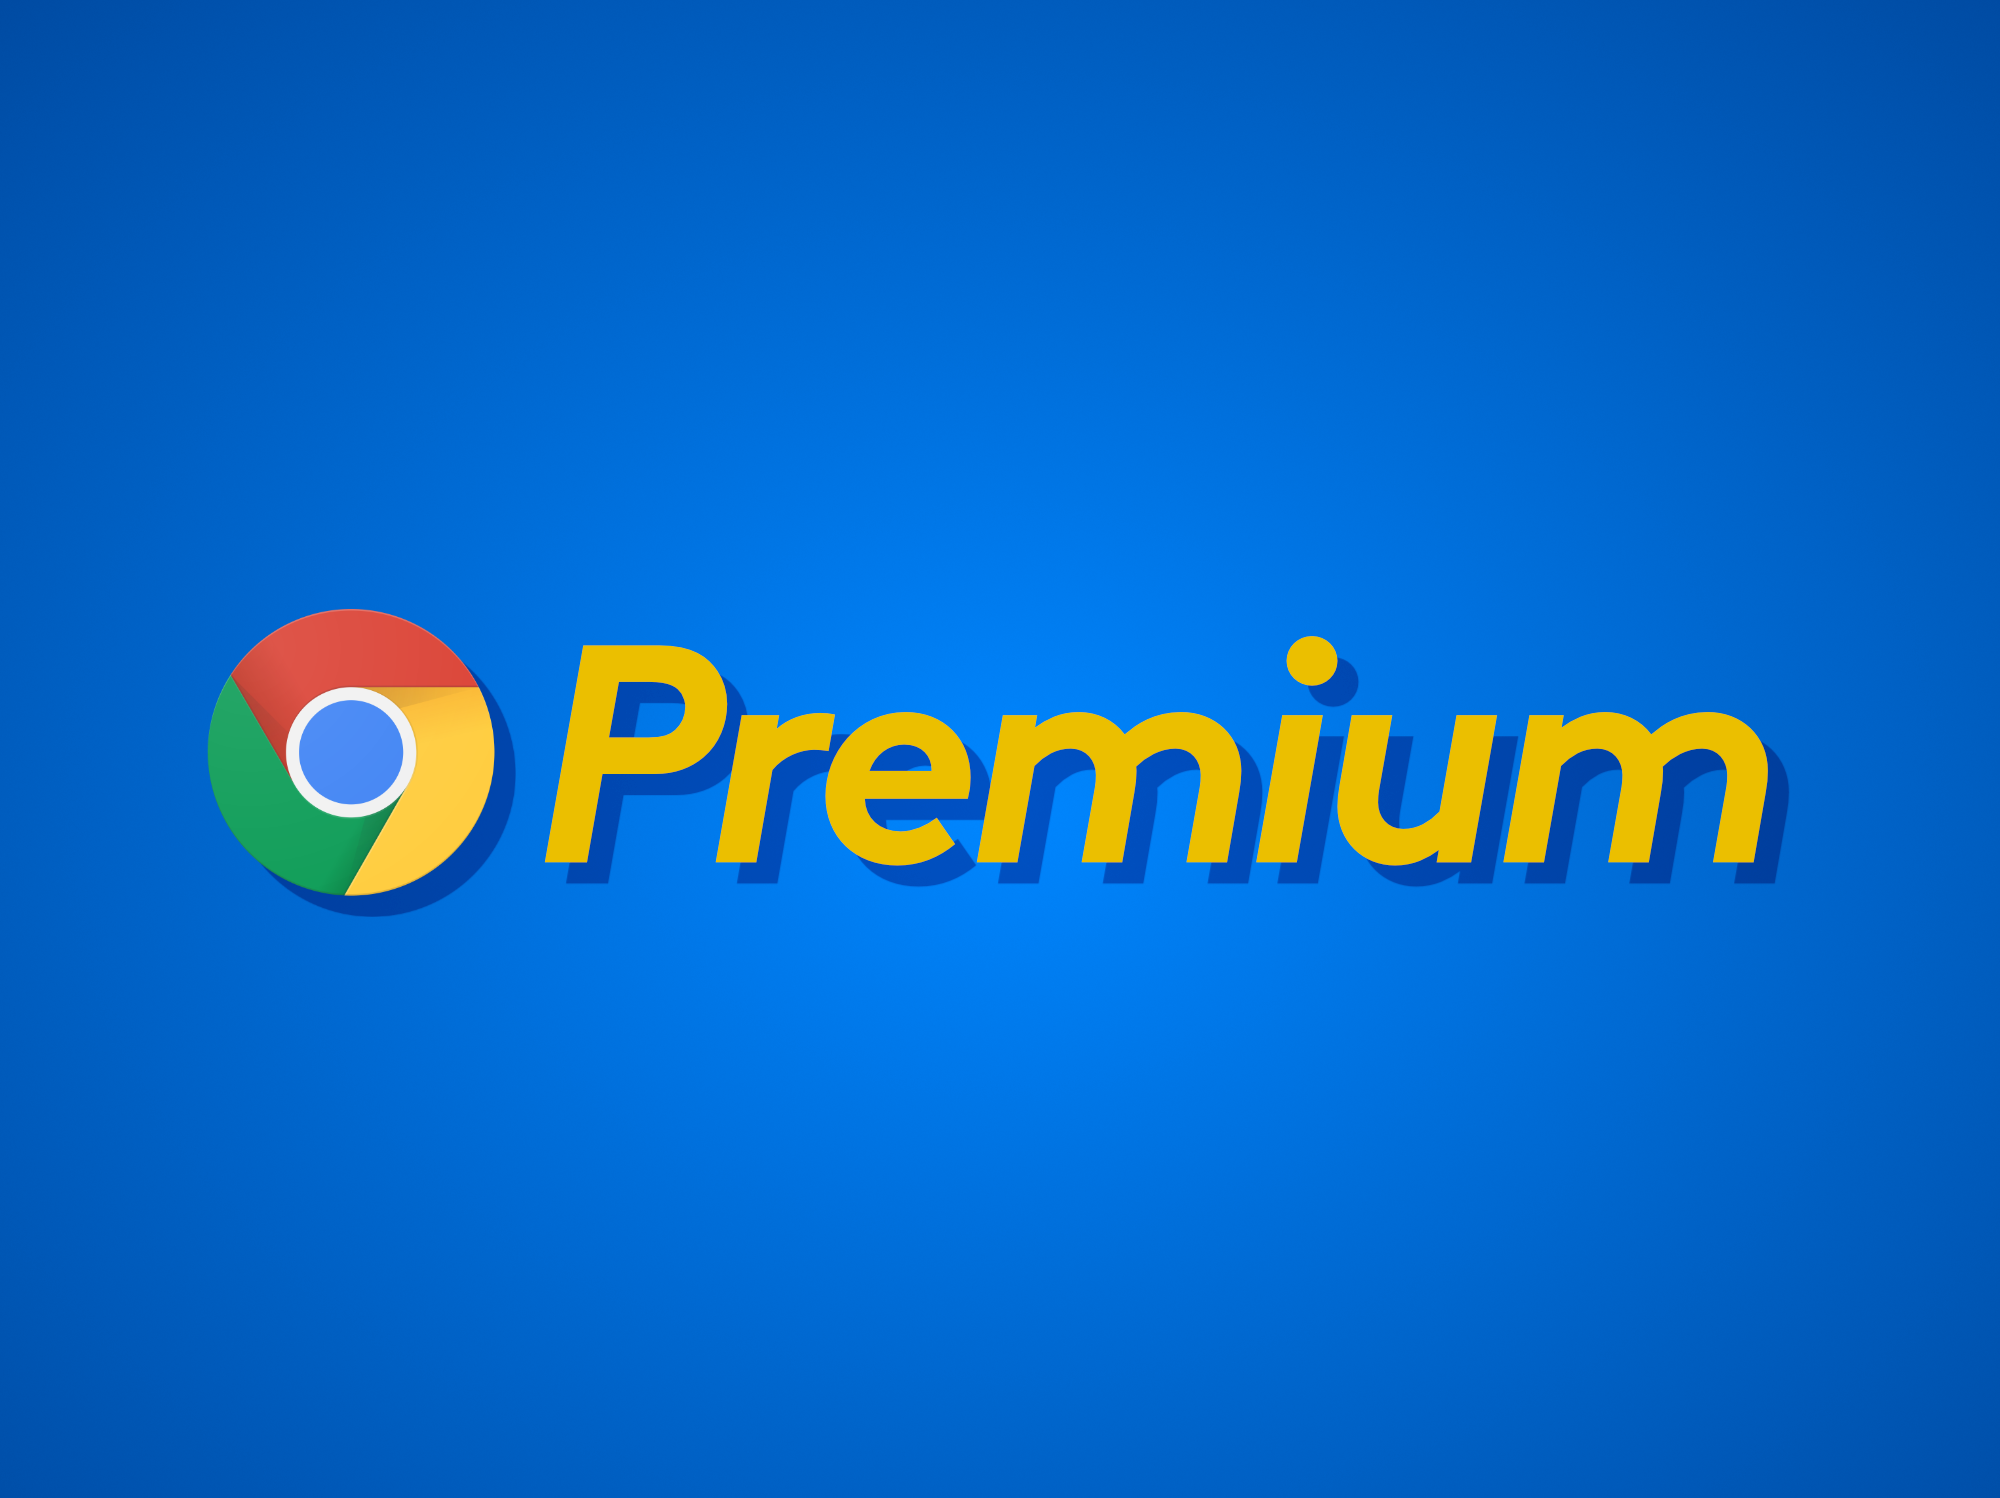 The Play Store now features a ‘Premium’ tab for Apps and Games optimized for Chromebooks